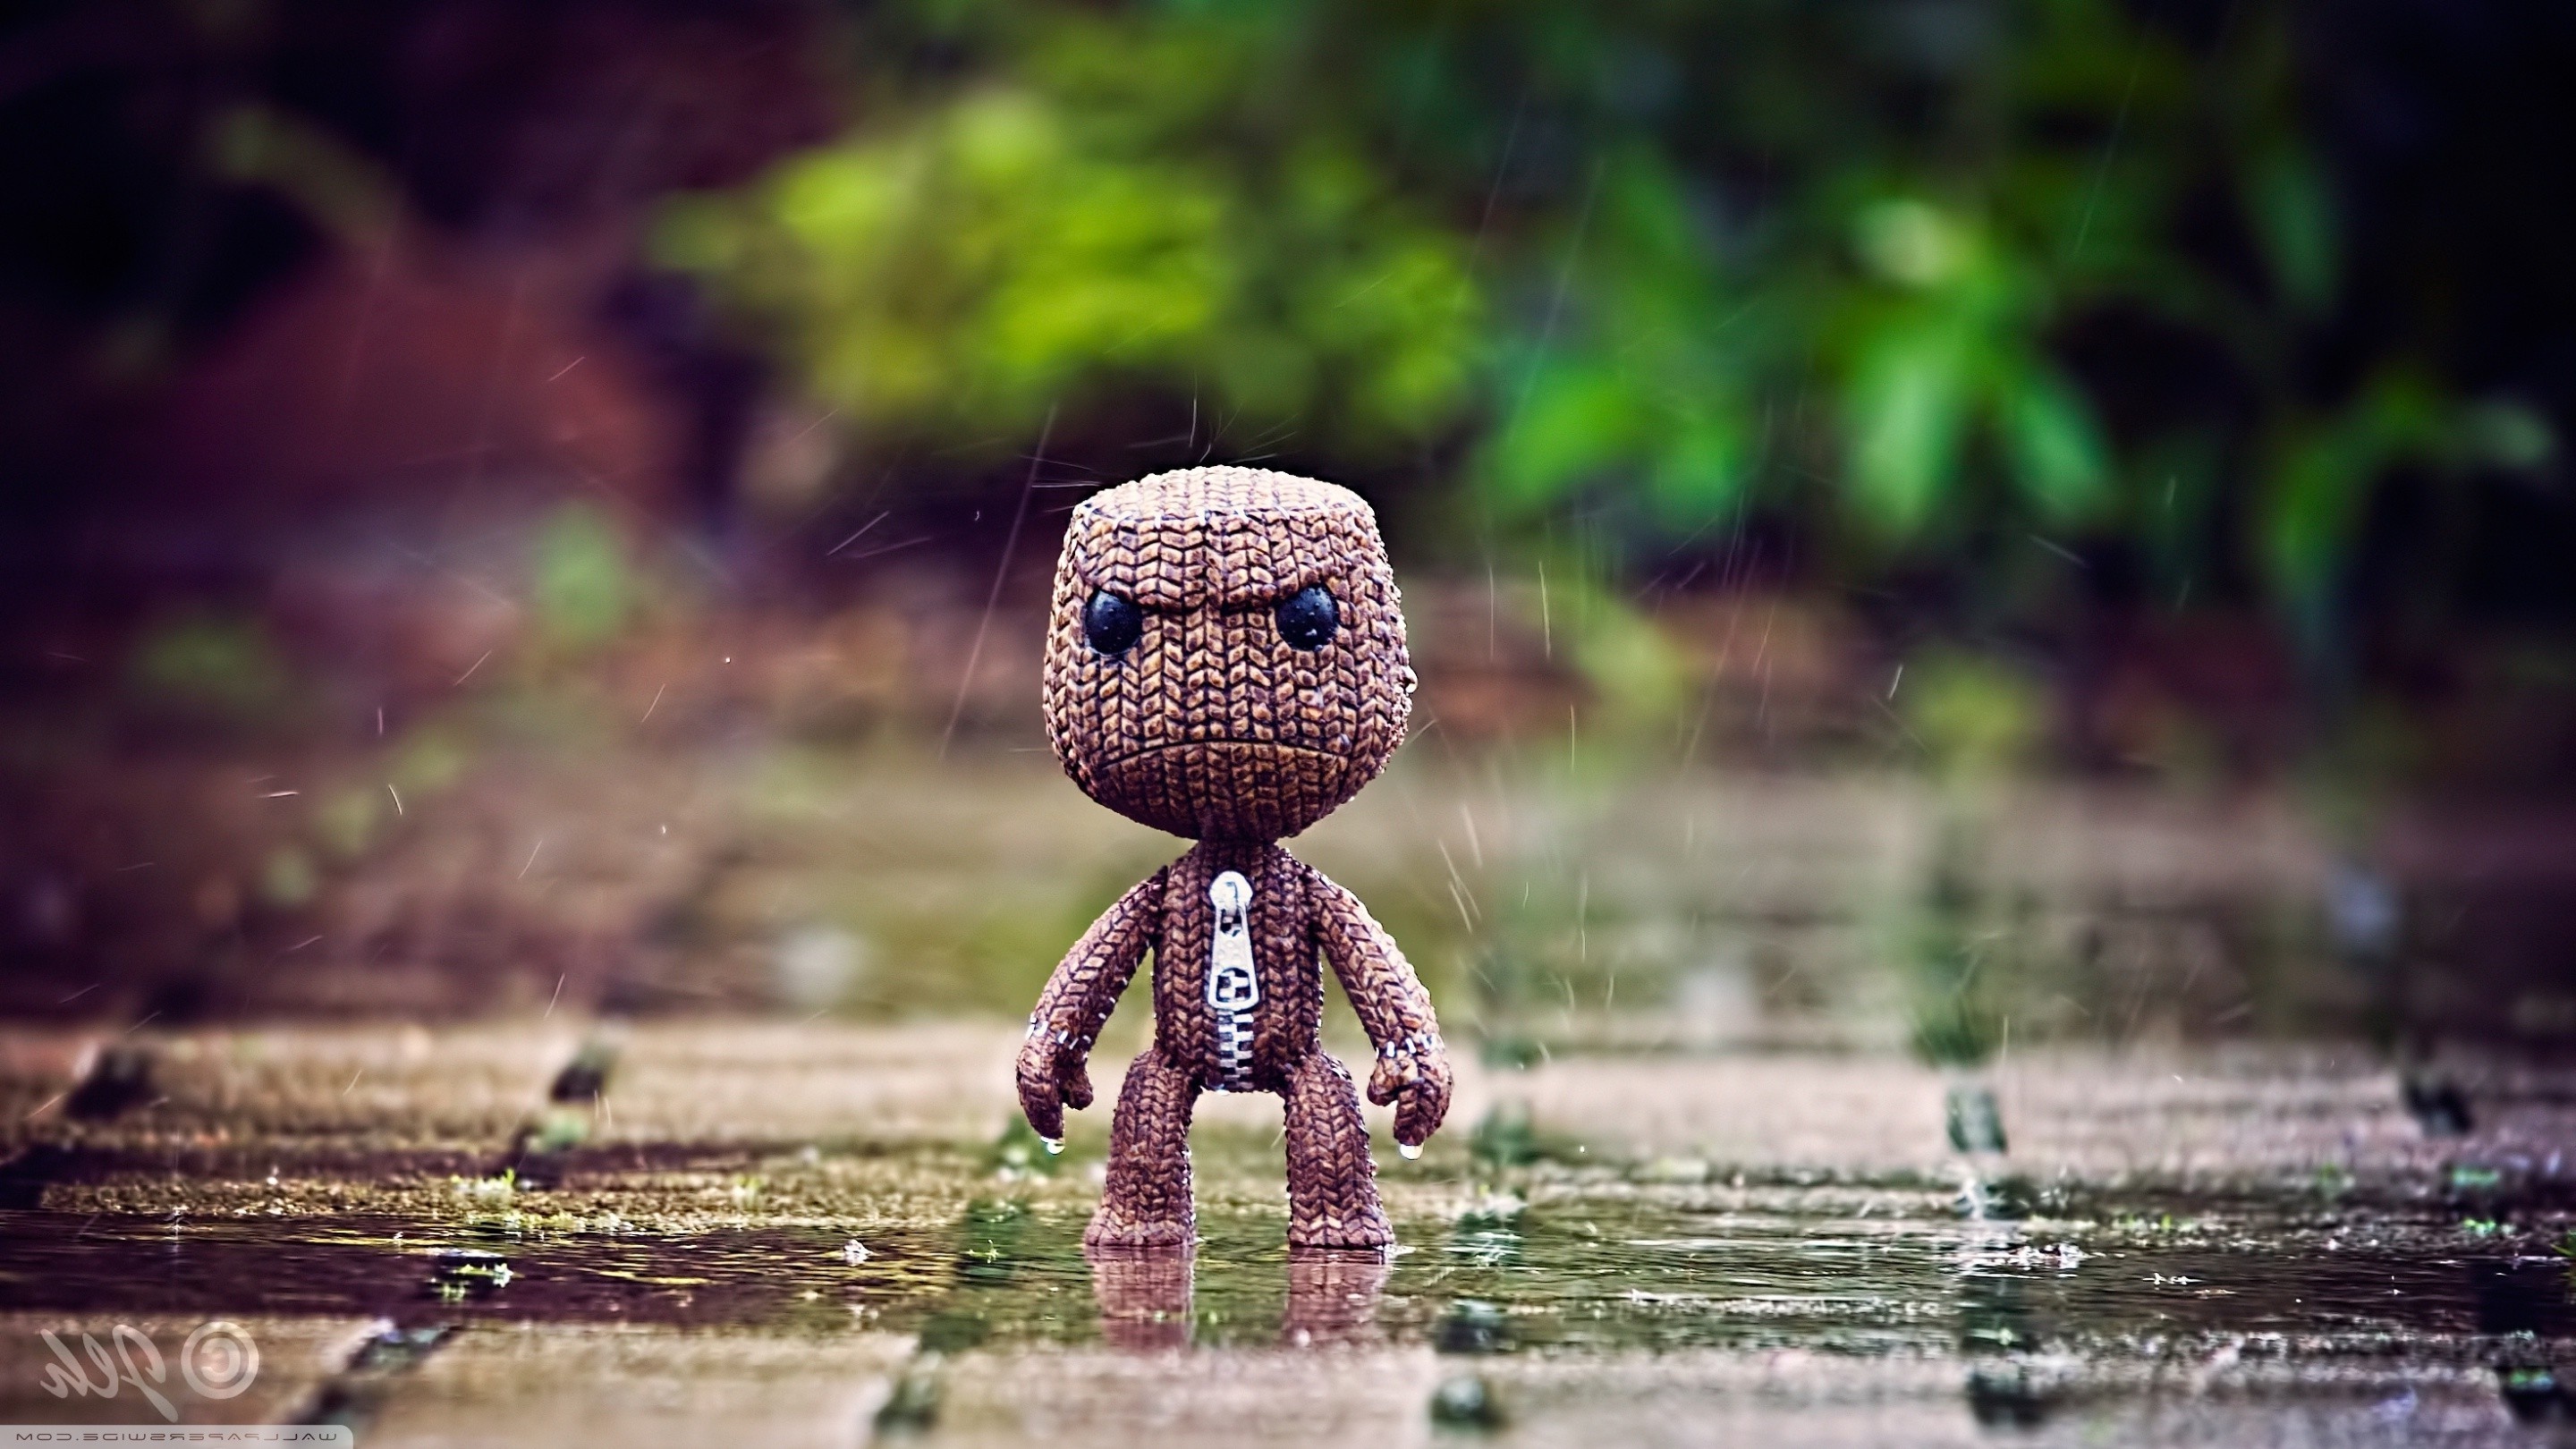 LBP game, Gaming world, Little Big Planet wallpapers, Diverse collection, 2880x1620 HD Desktop